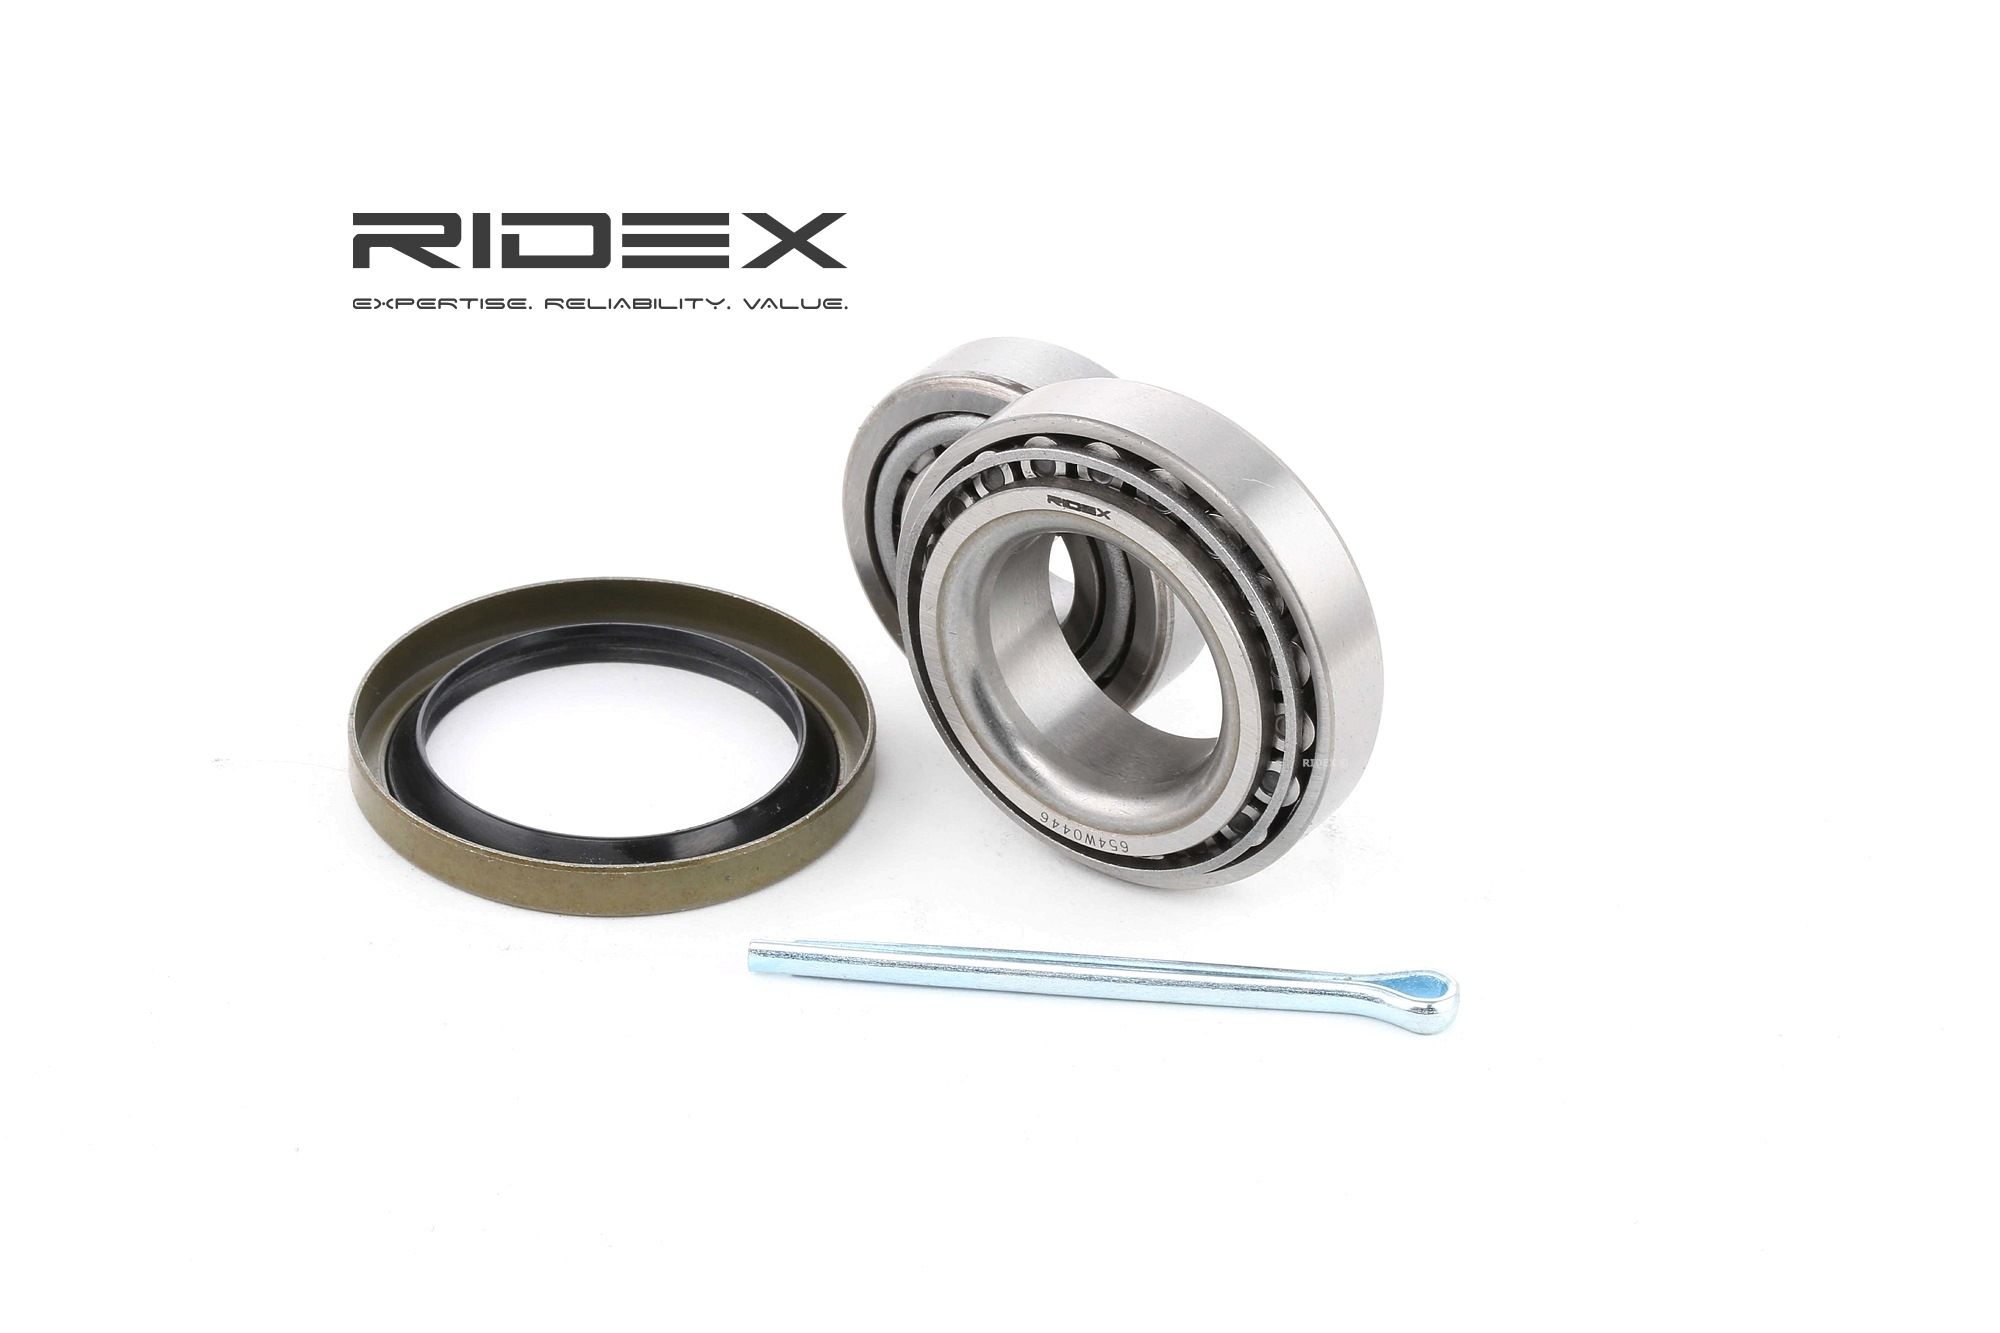 RIDEX 654W0446 Wheel bearing kit Front axle both sides, Rear Axle both sides, 50 mm